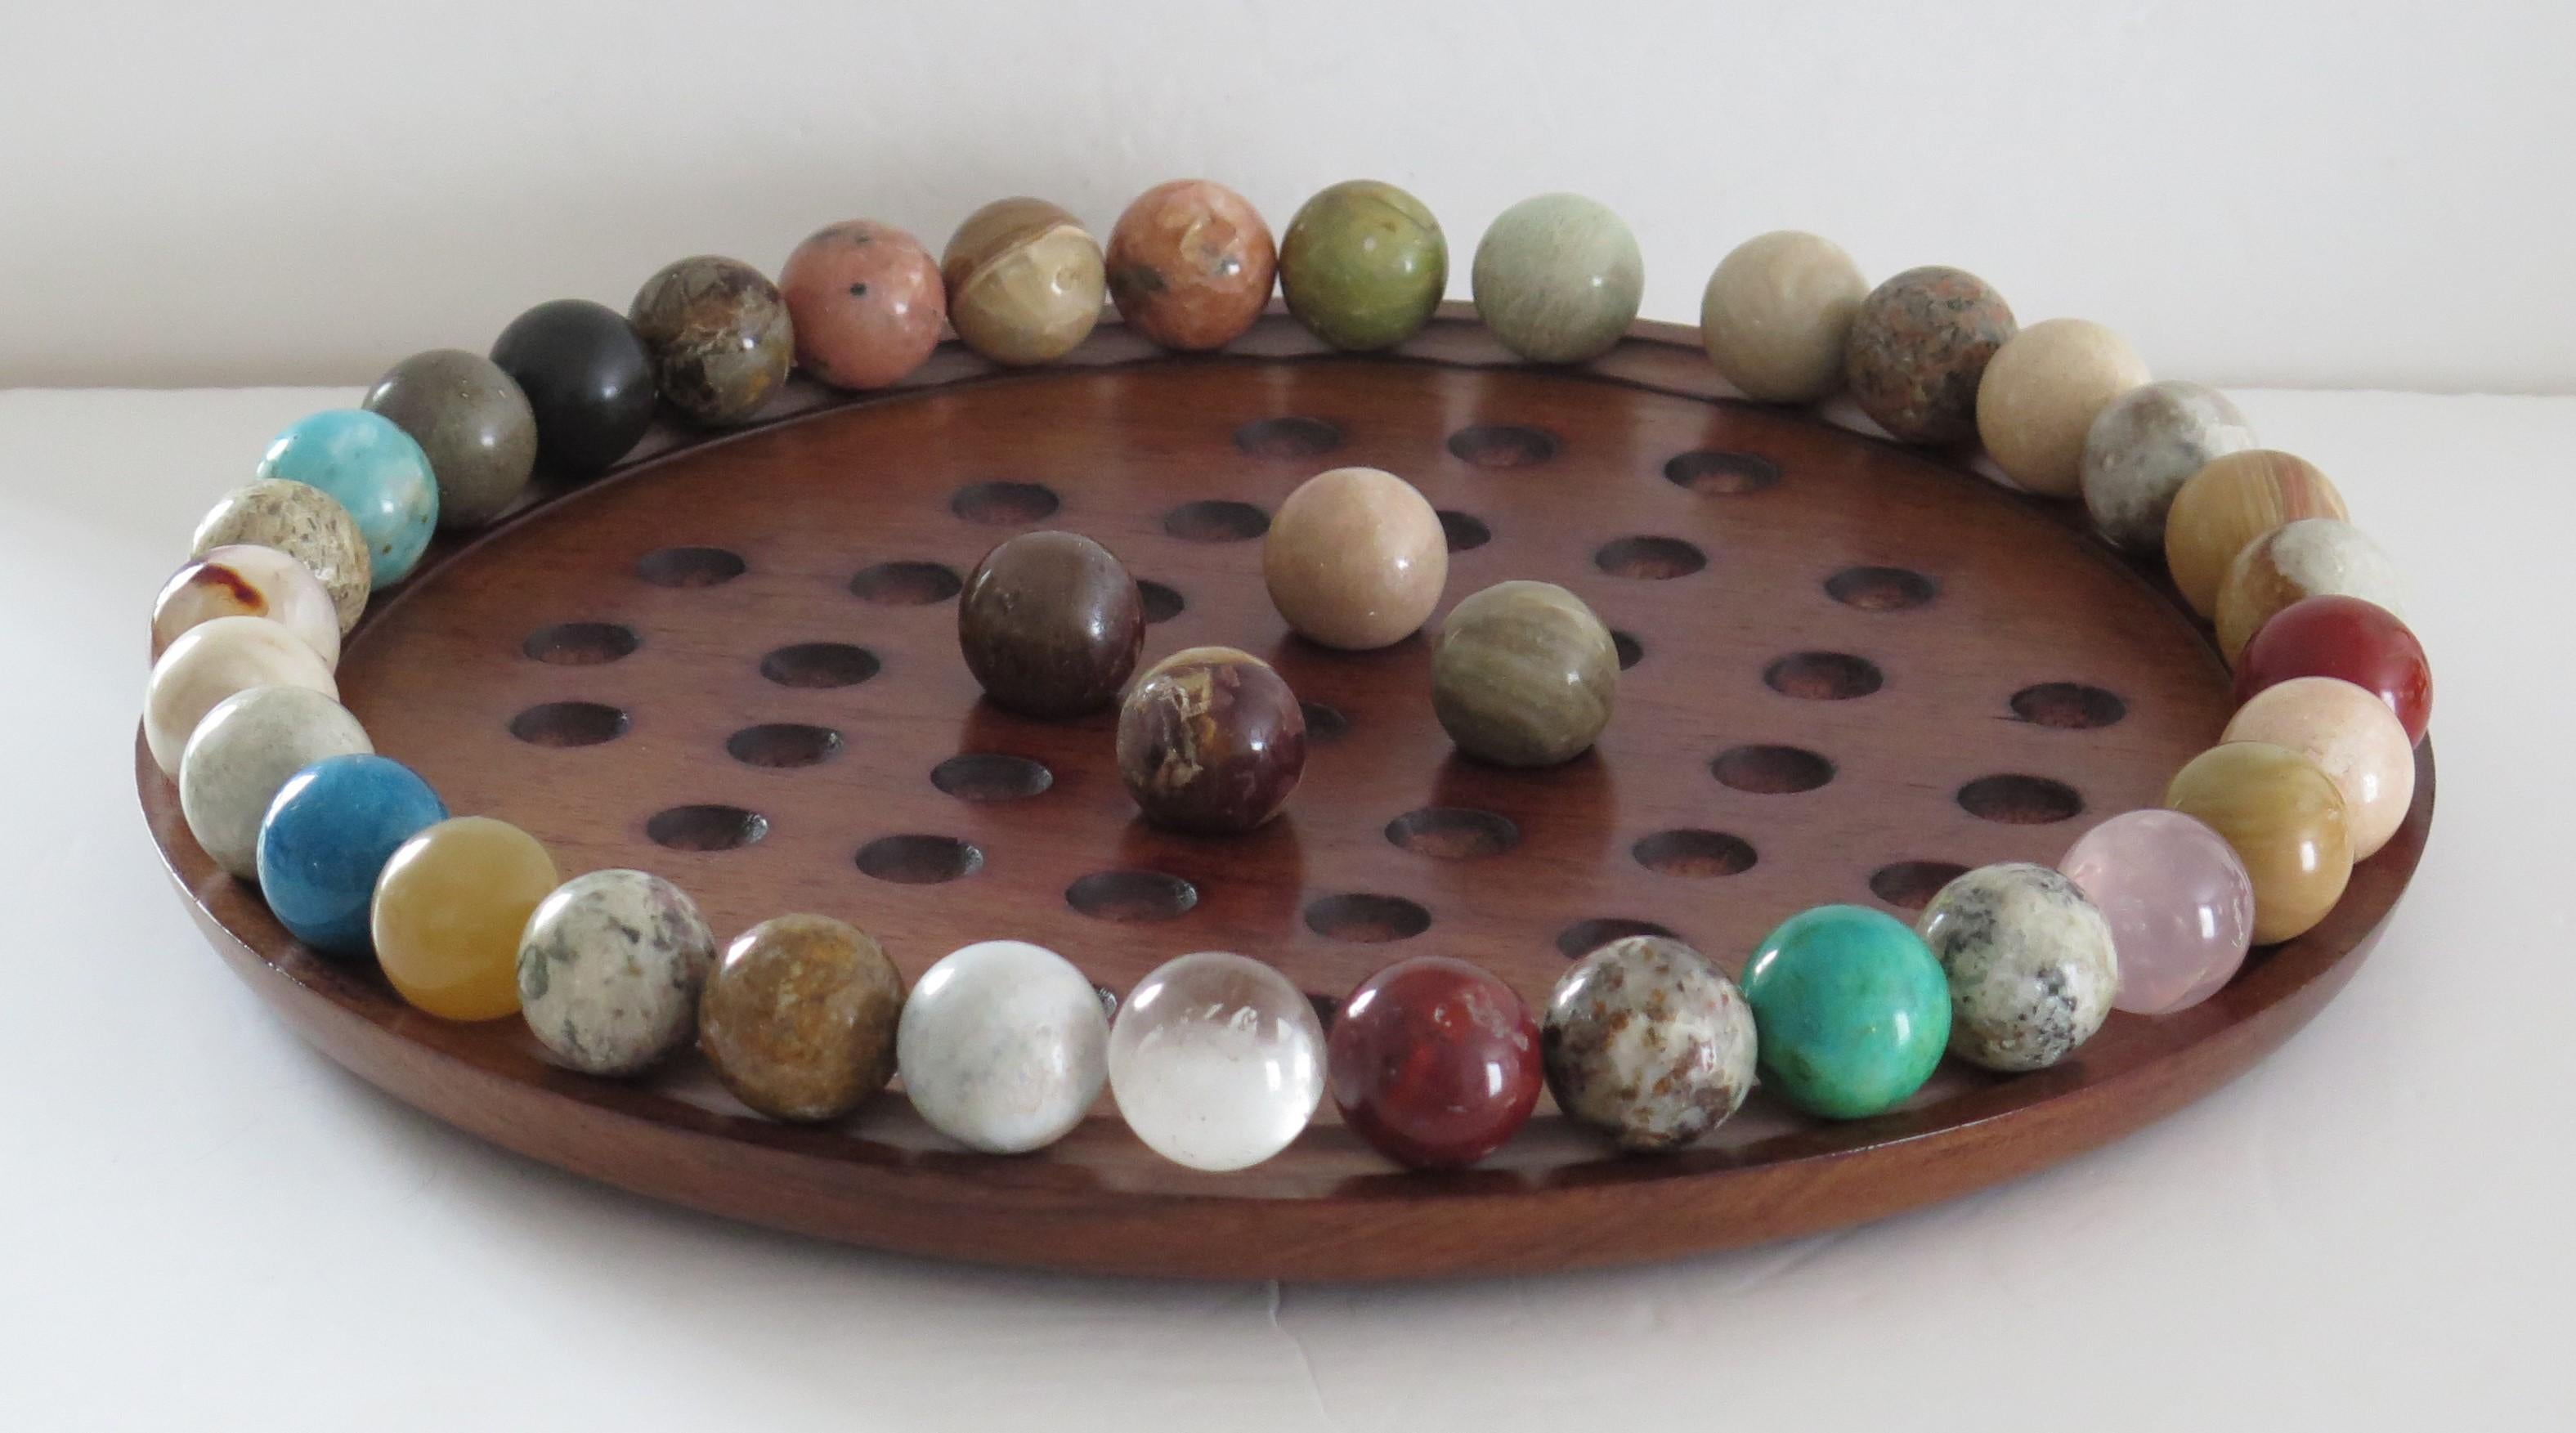 Victorian Large Marble Table Solitaire Game with 37 Mineral Stone Marbles, French Ca. 1920